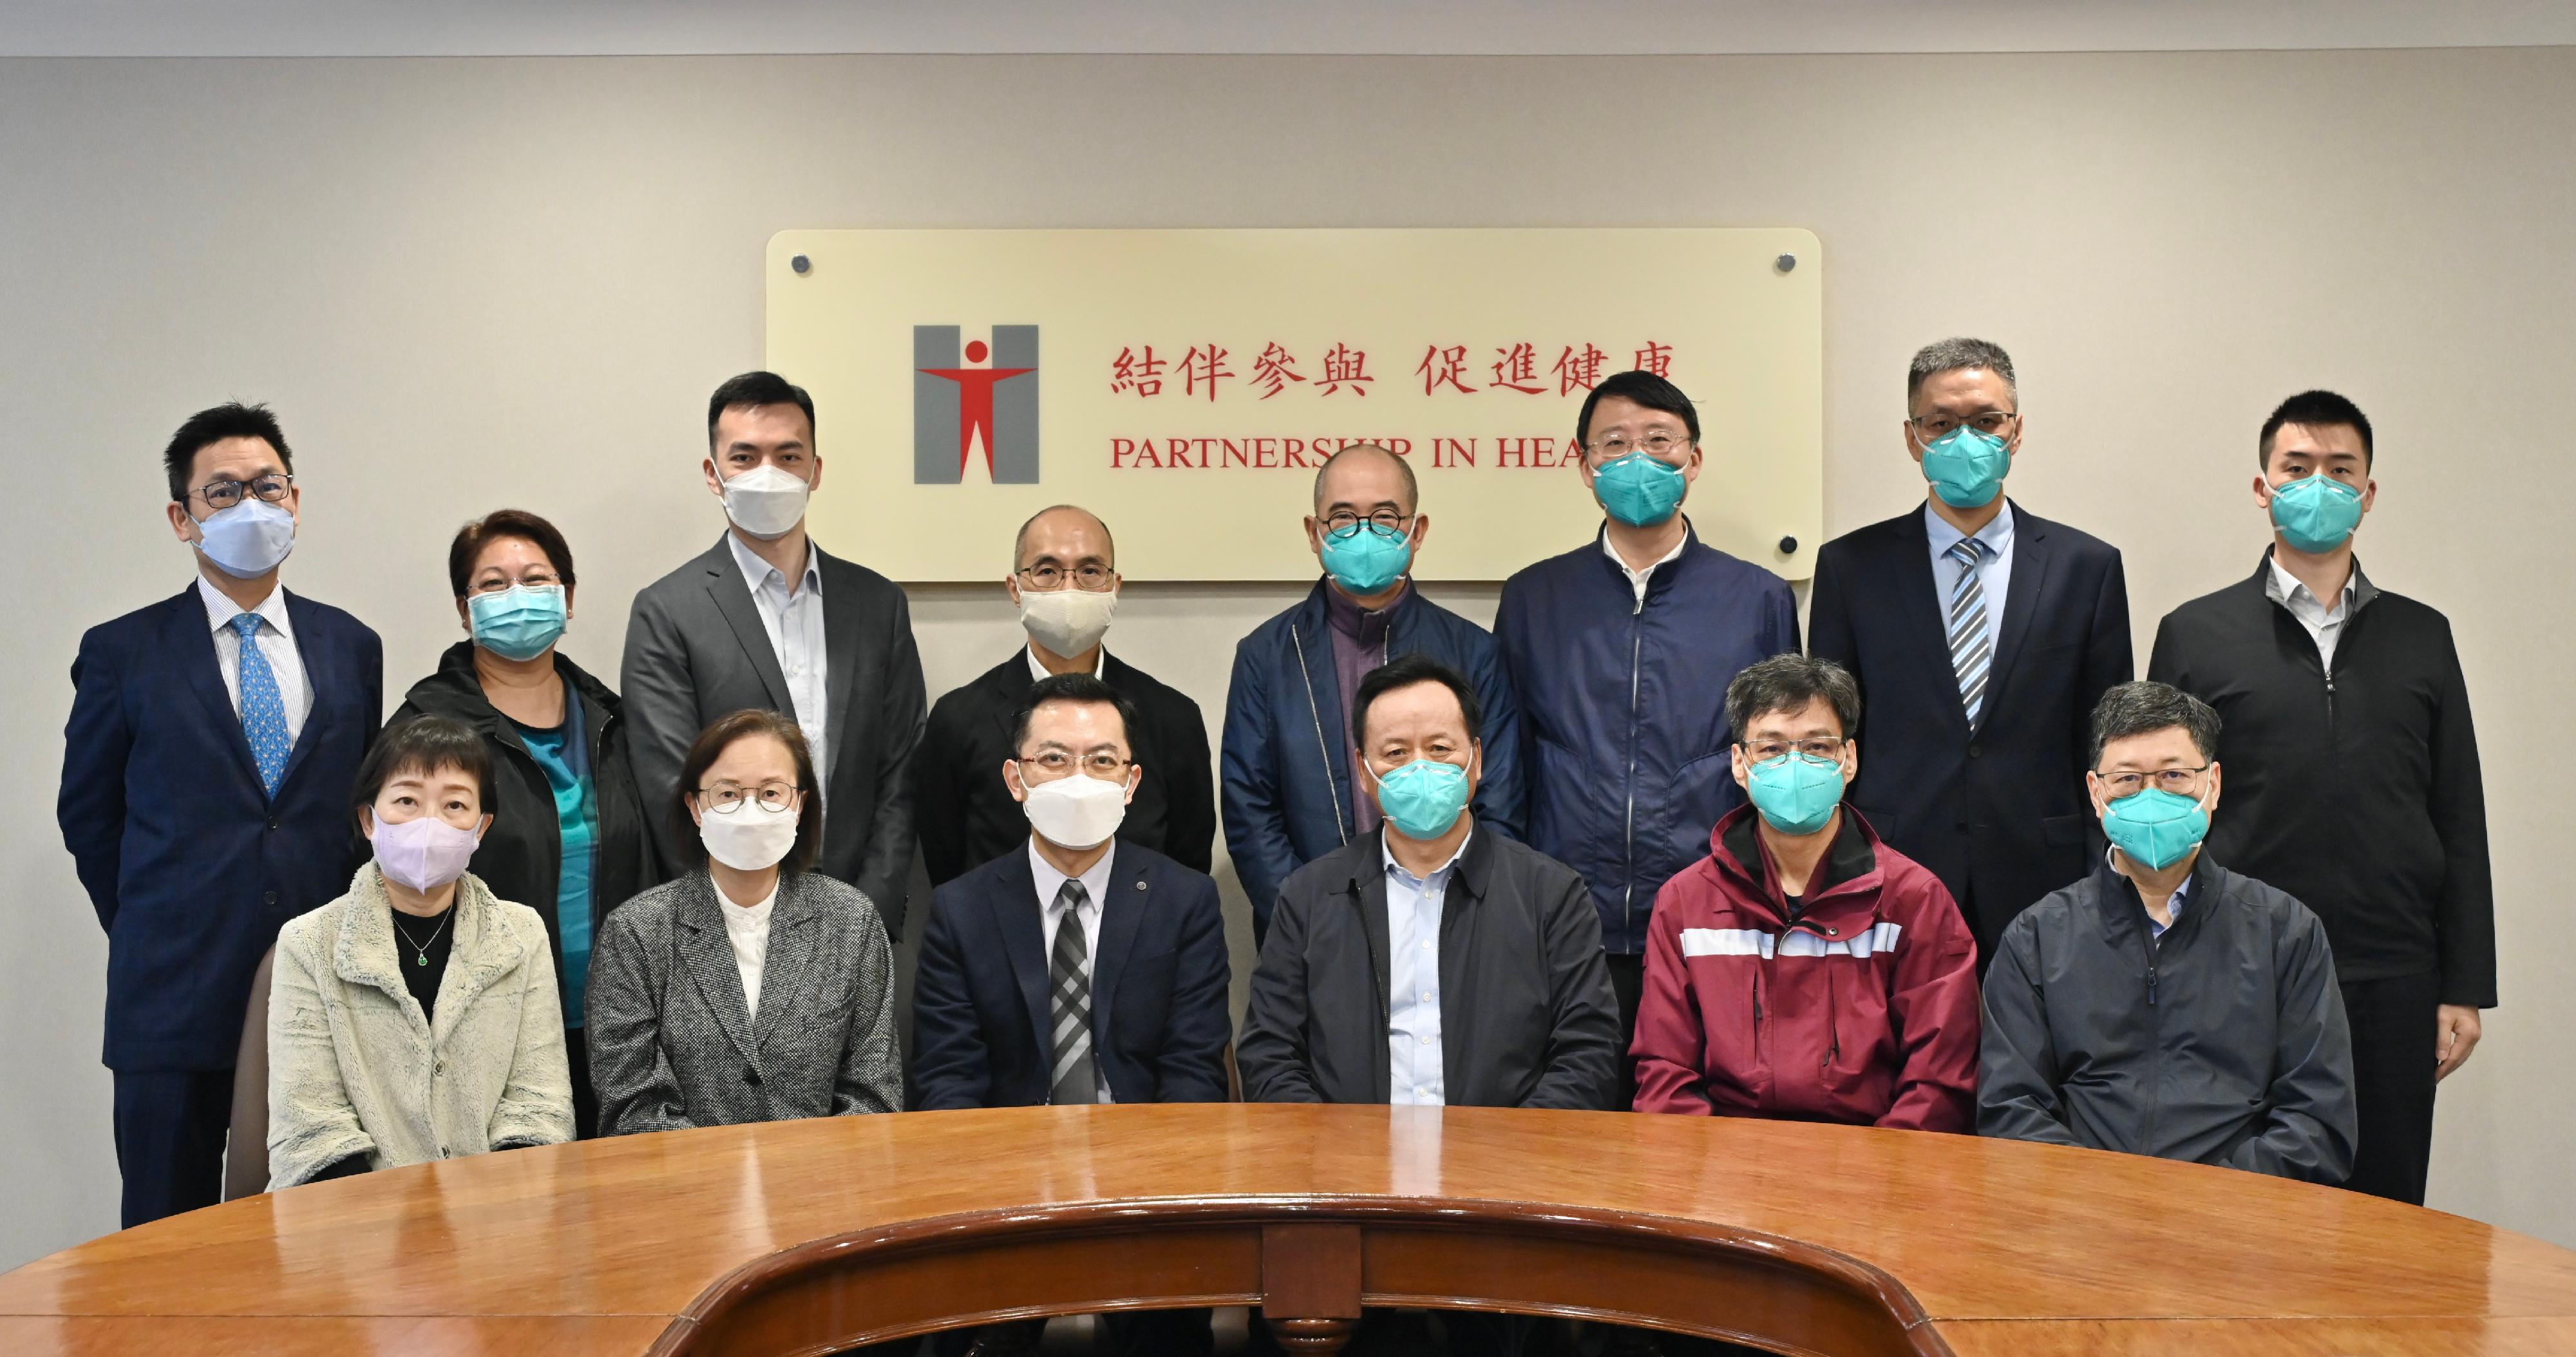 The Director of Health, Dr Ronald Lam (third left, front row) holds a meeting with the Leader of the Mainland Chinese medicine expert group of the Central Authorities, Mr Tong Xiaolin (third right, front row) and other group members this morning (March 30) to get a better grasp of the latest epidemic development and situation in Hong Kong. Photo shows participants taking group picture after the meeting.